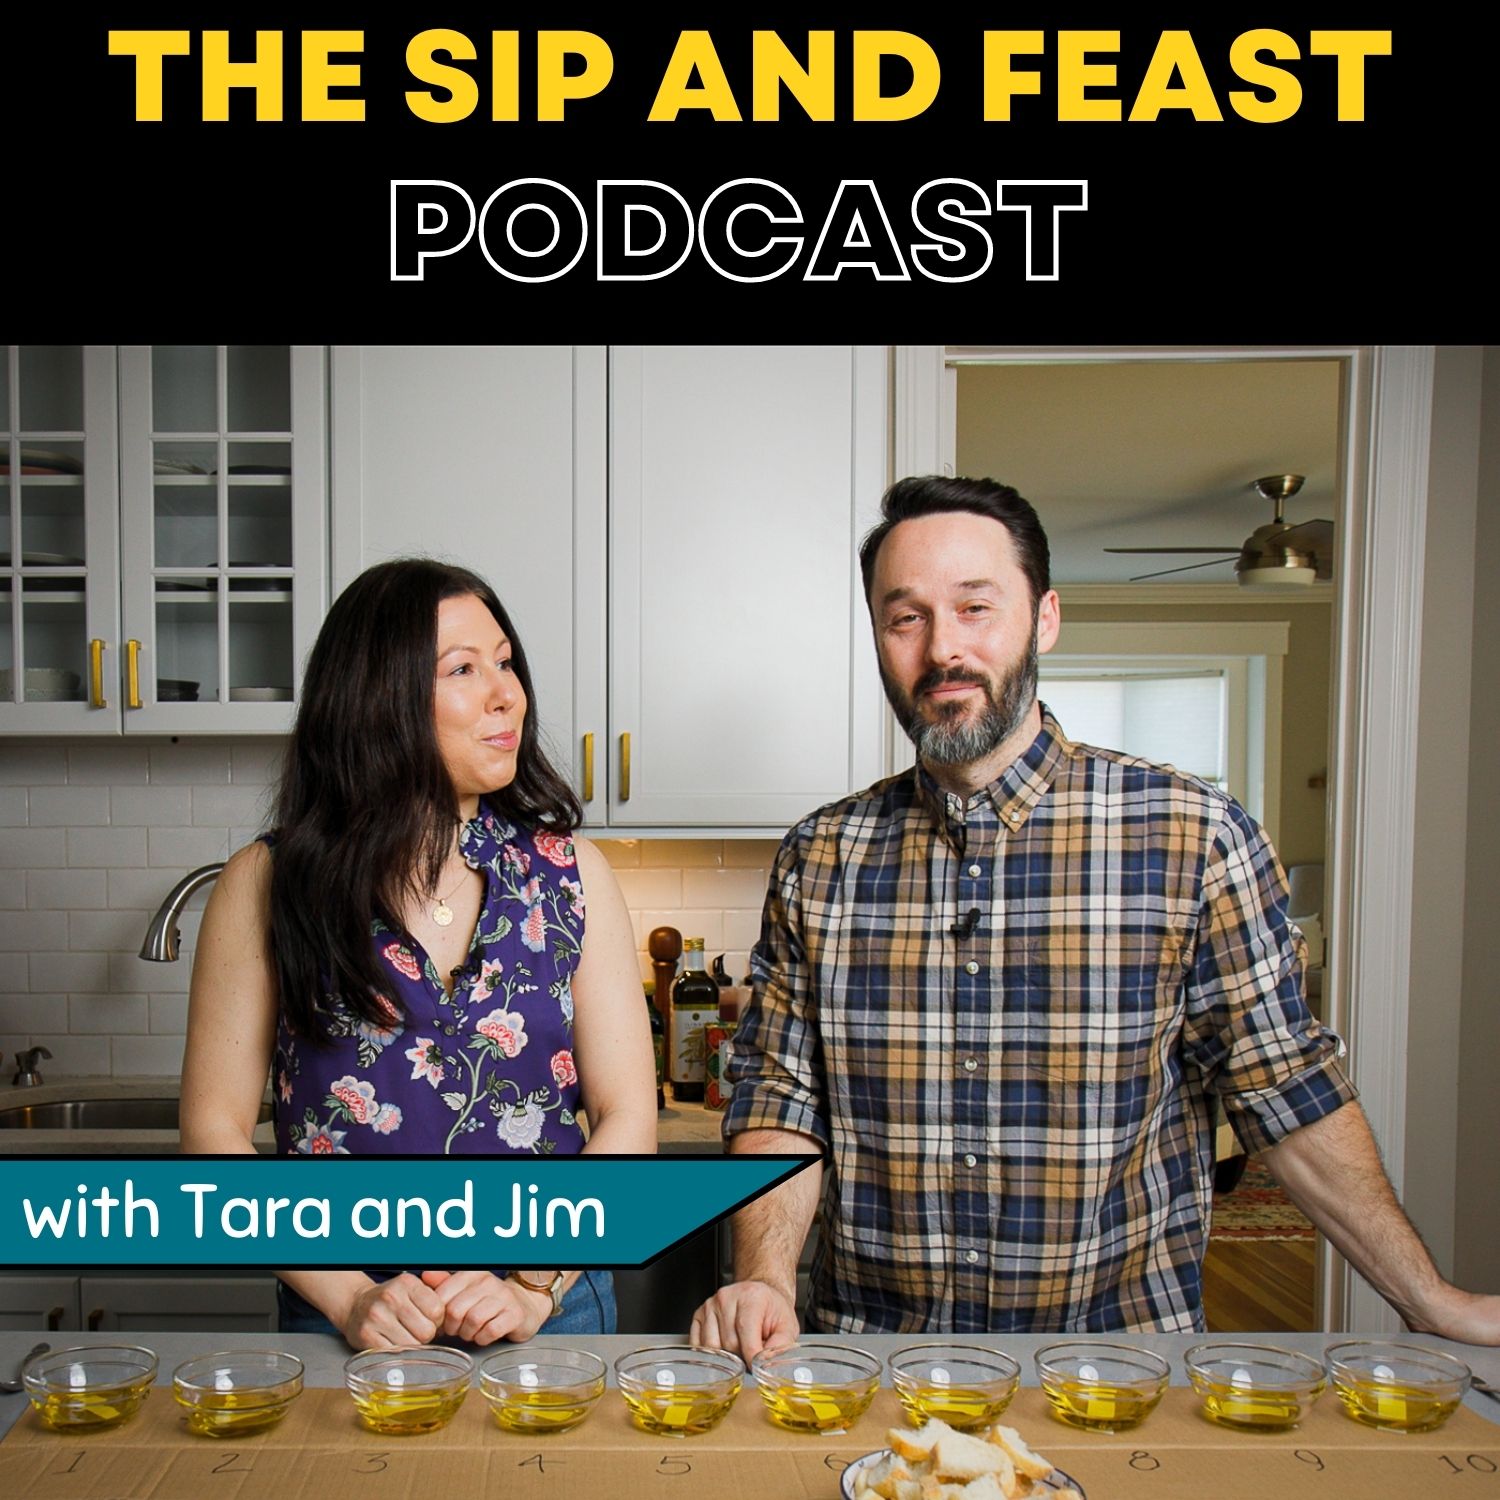 The Sip and Feast Podcast